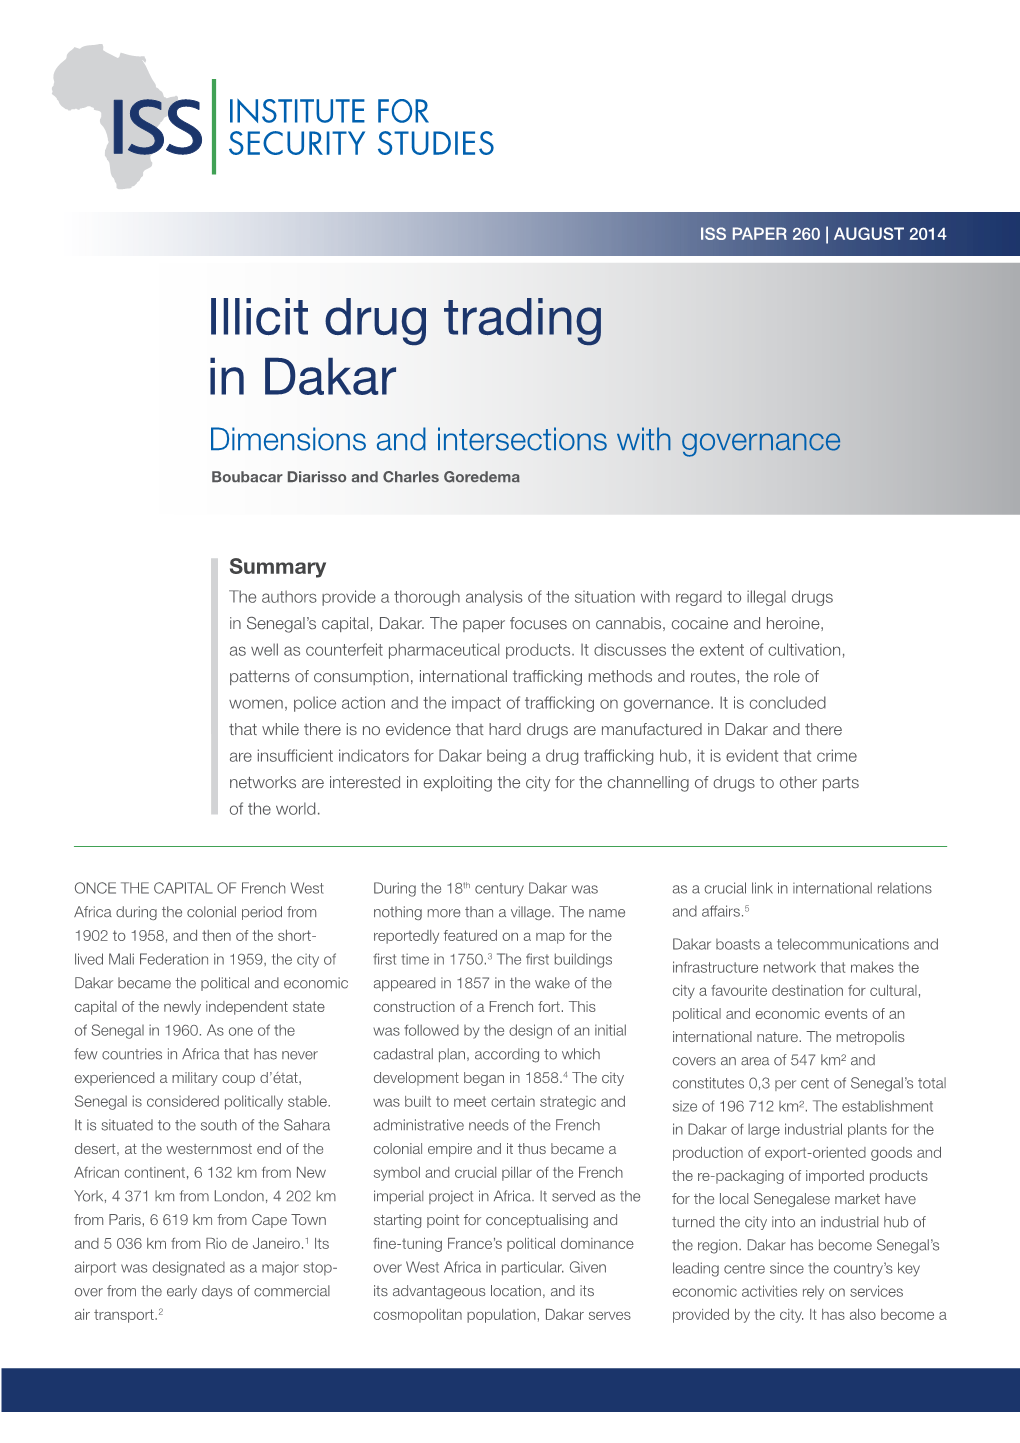 Illicit Drug Trading in Dakar Dimensions and Intersections with Governance Boubacar Diarisso and Charles Goredema